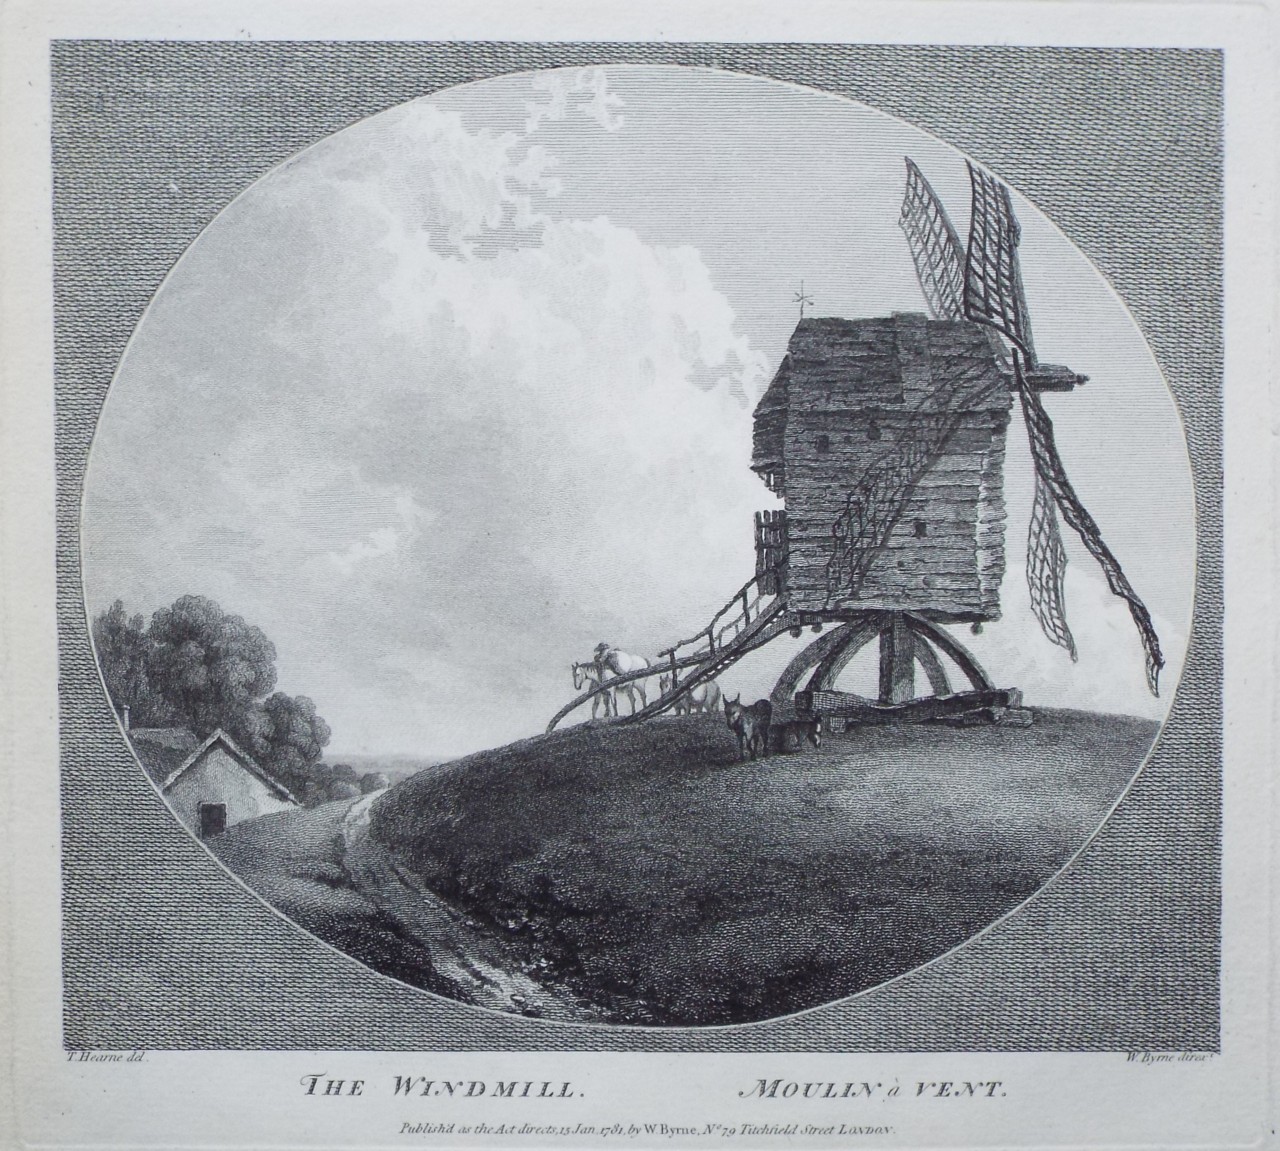 Print - The Windmill. Moulin a Vent. - Byrne